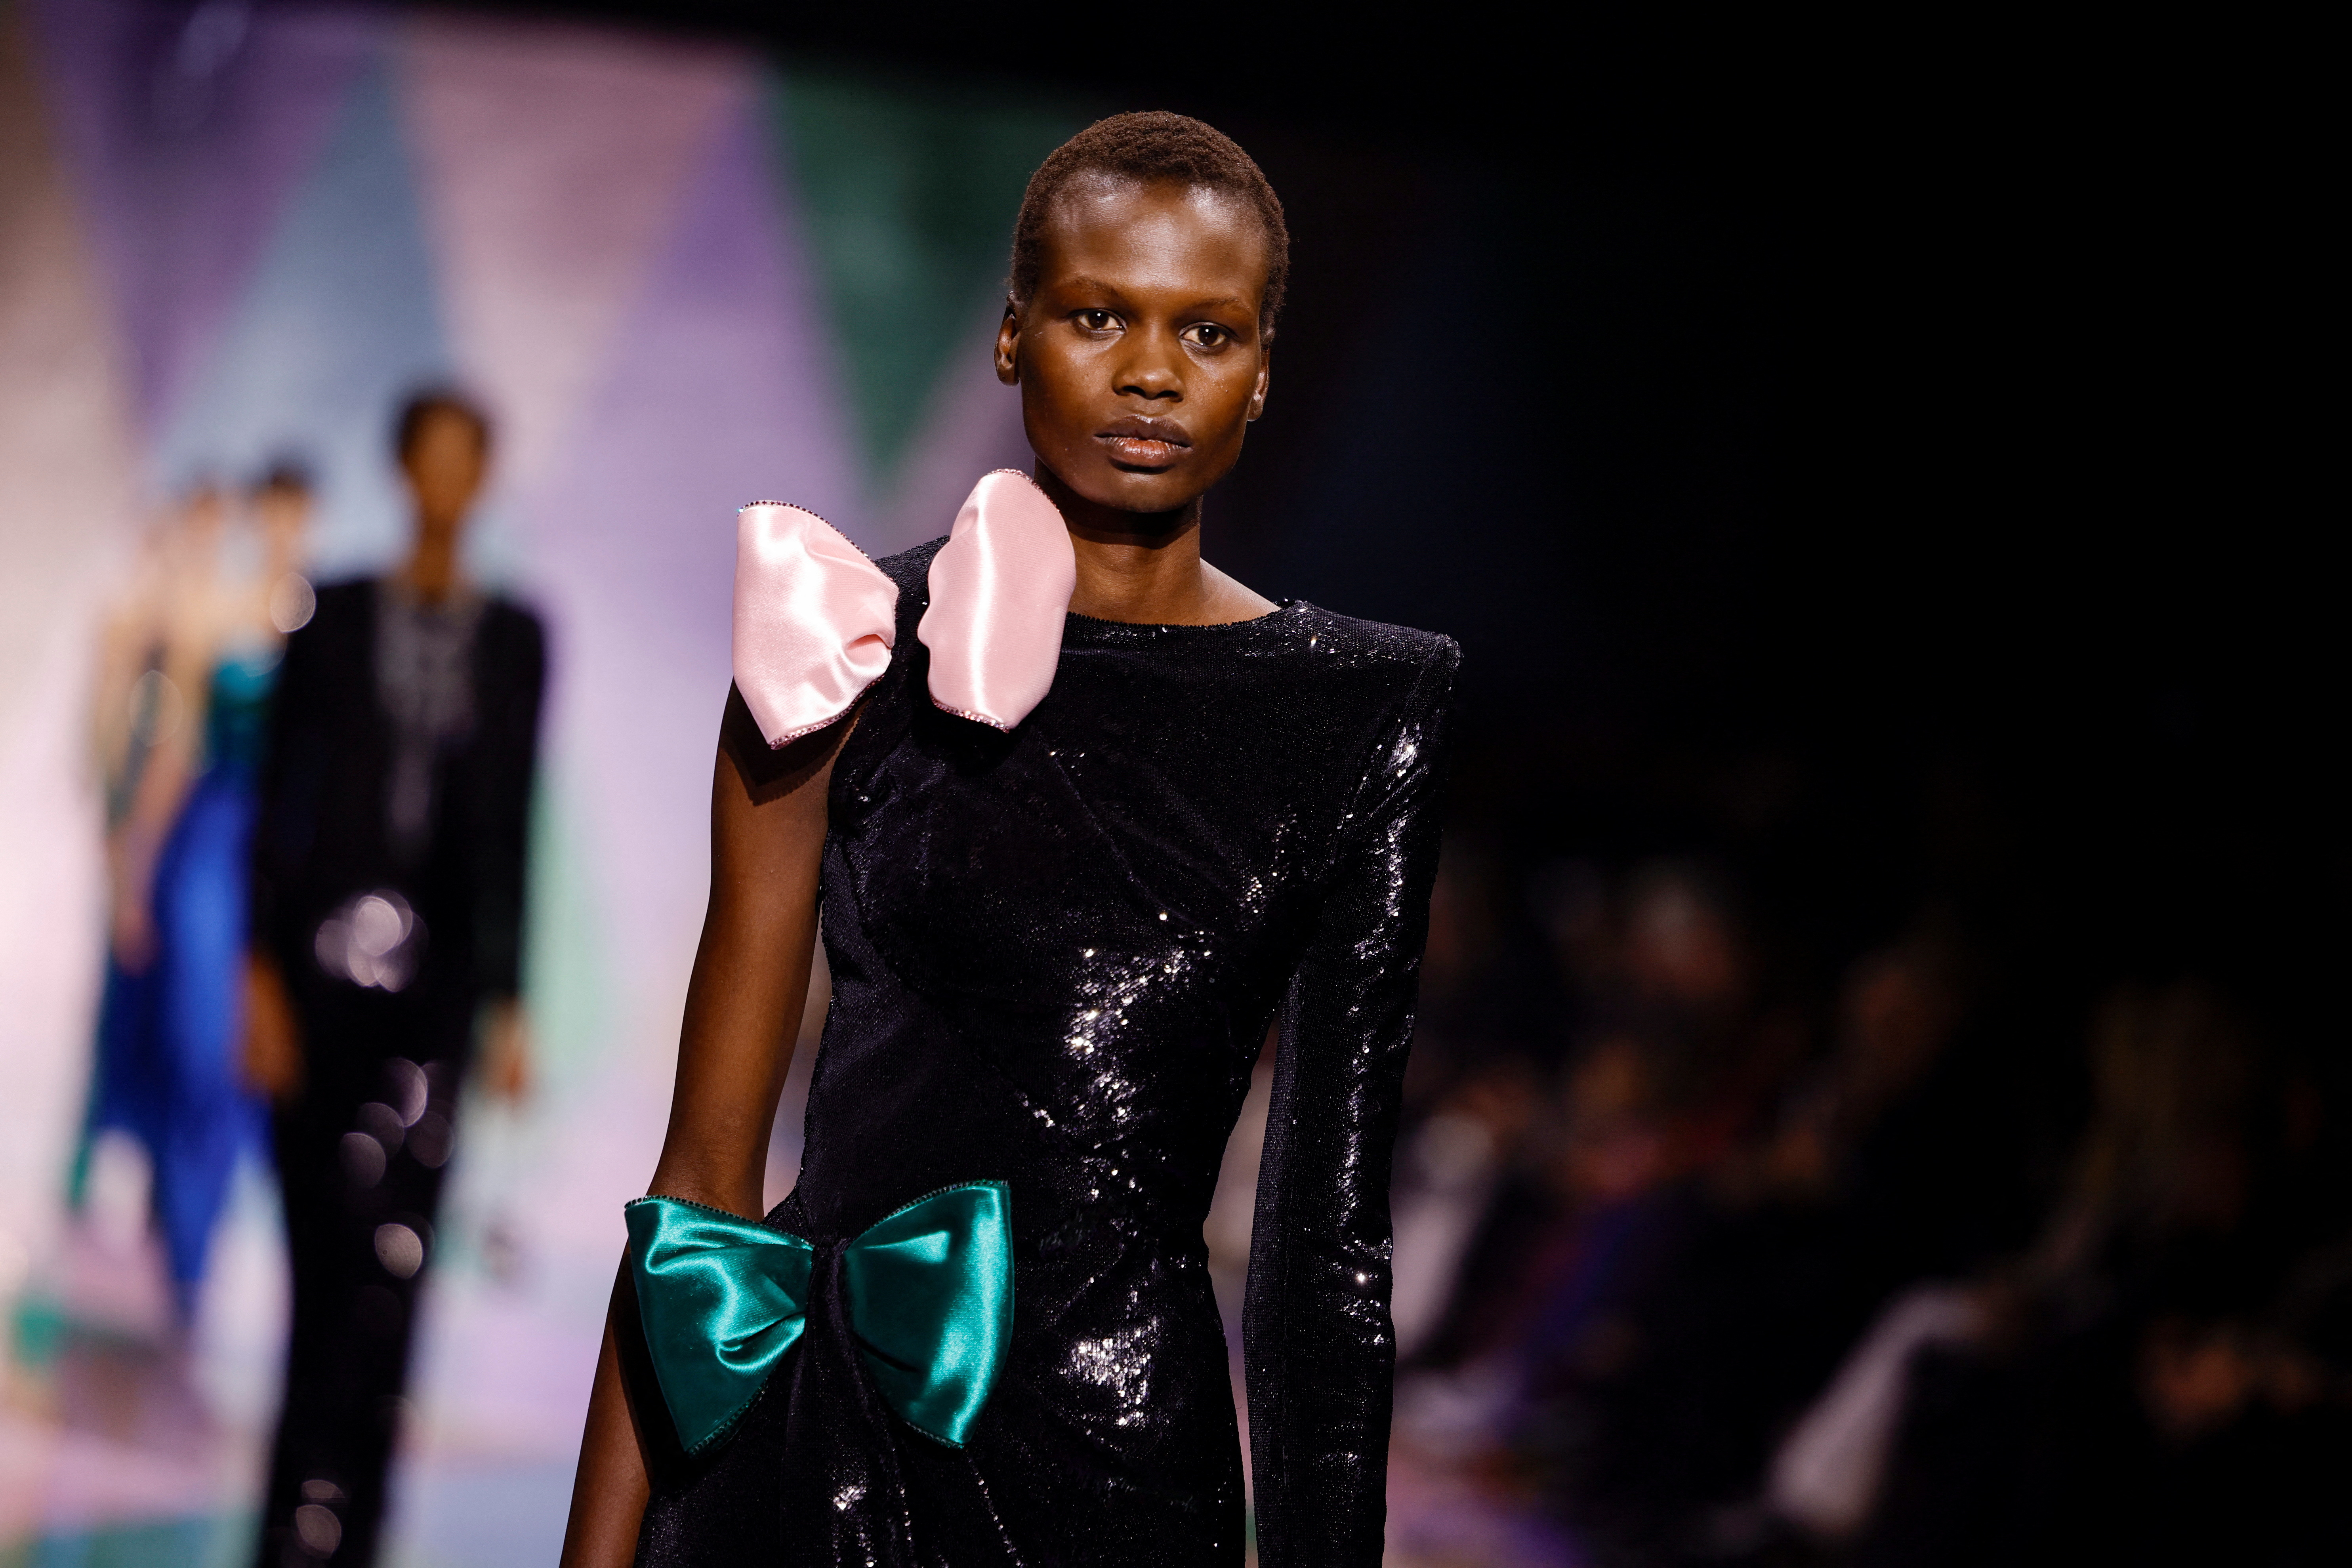 Giorgio Armani Went All In for Harlequin Patterns for Haute Couture – WWD